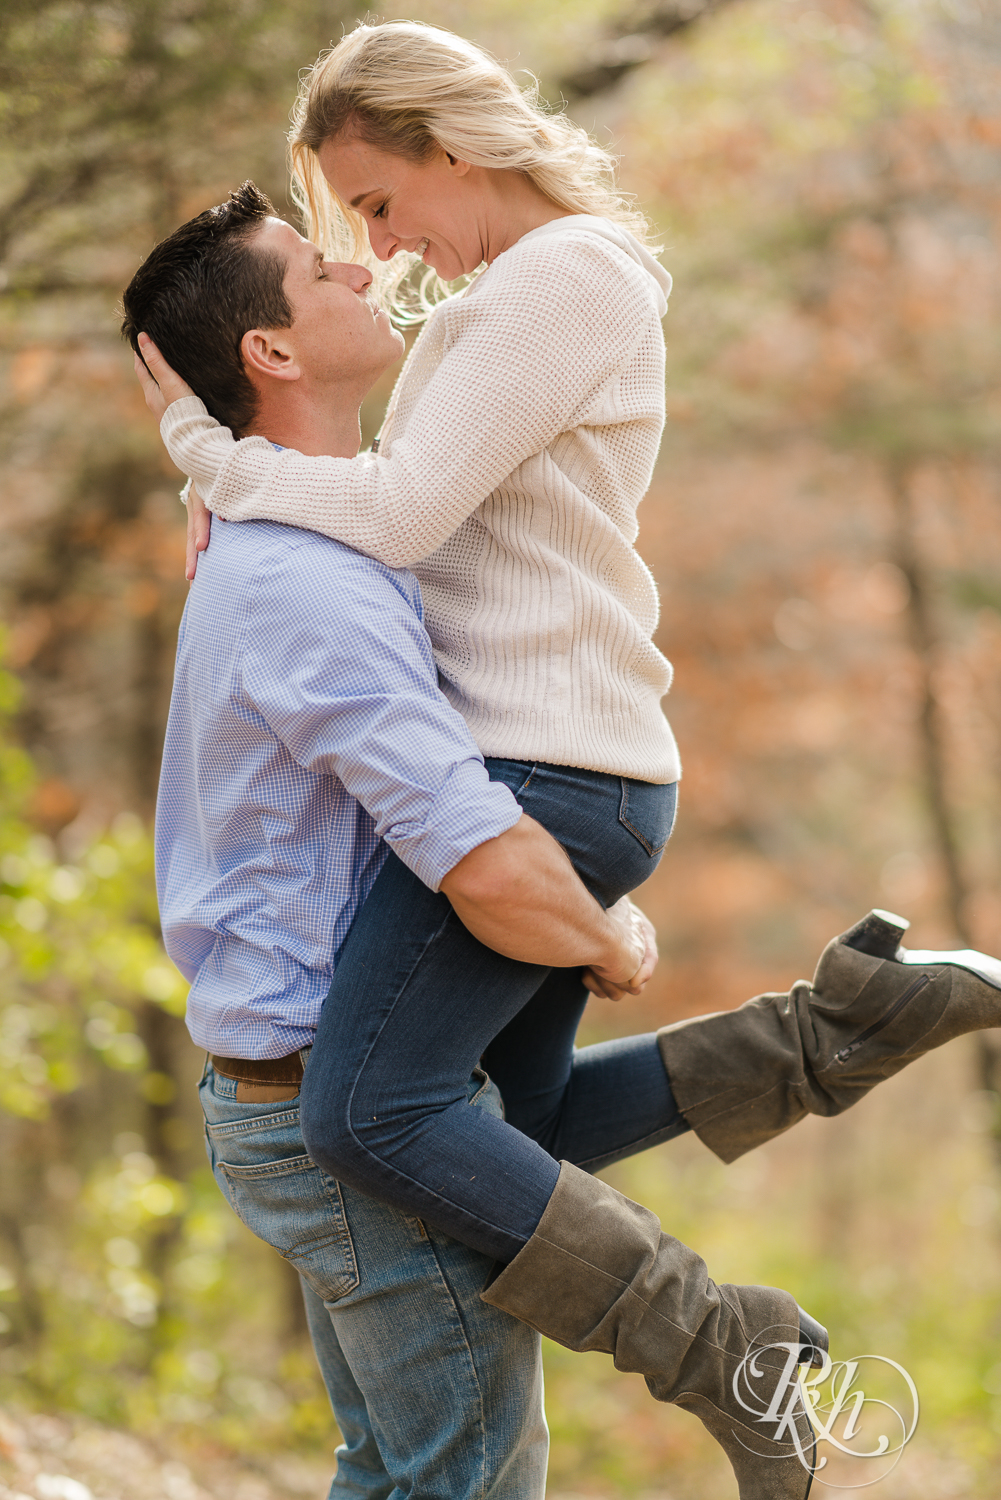 Man lifting blonde woman in leaves during fall engagement photography session in Chaska, Minnesota.